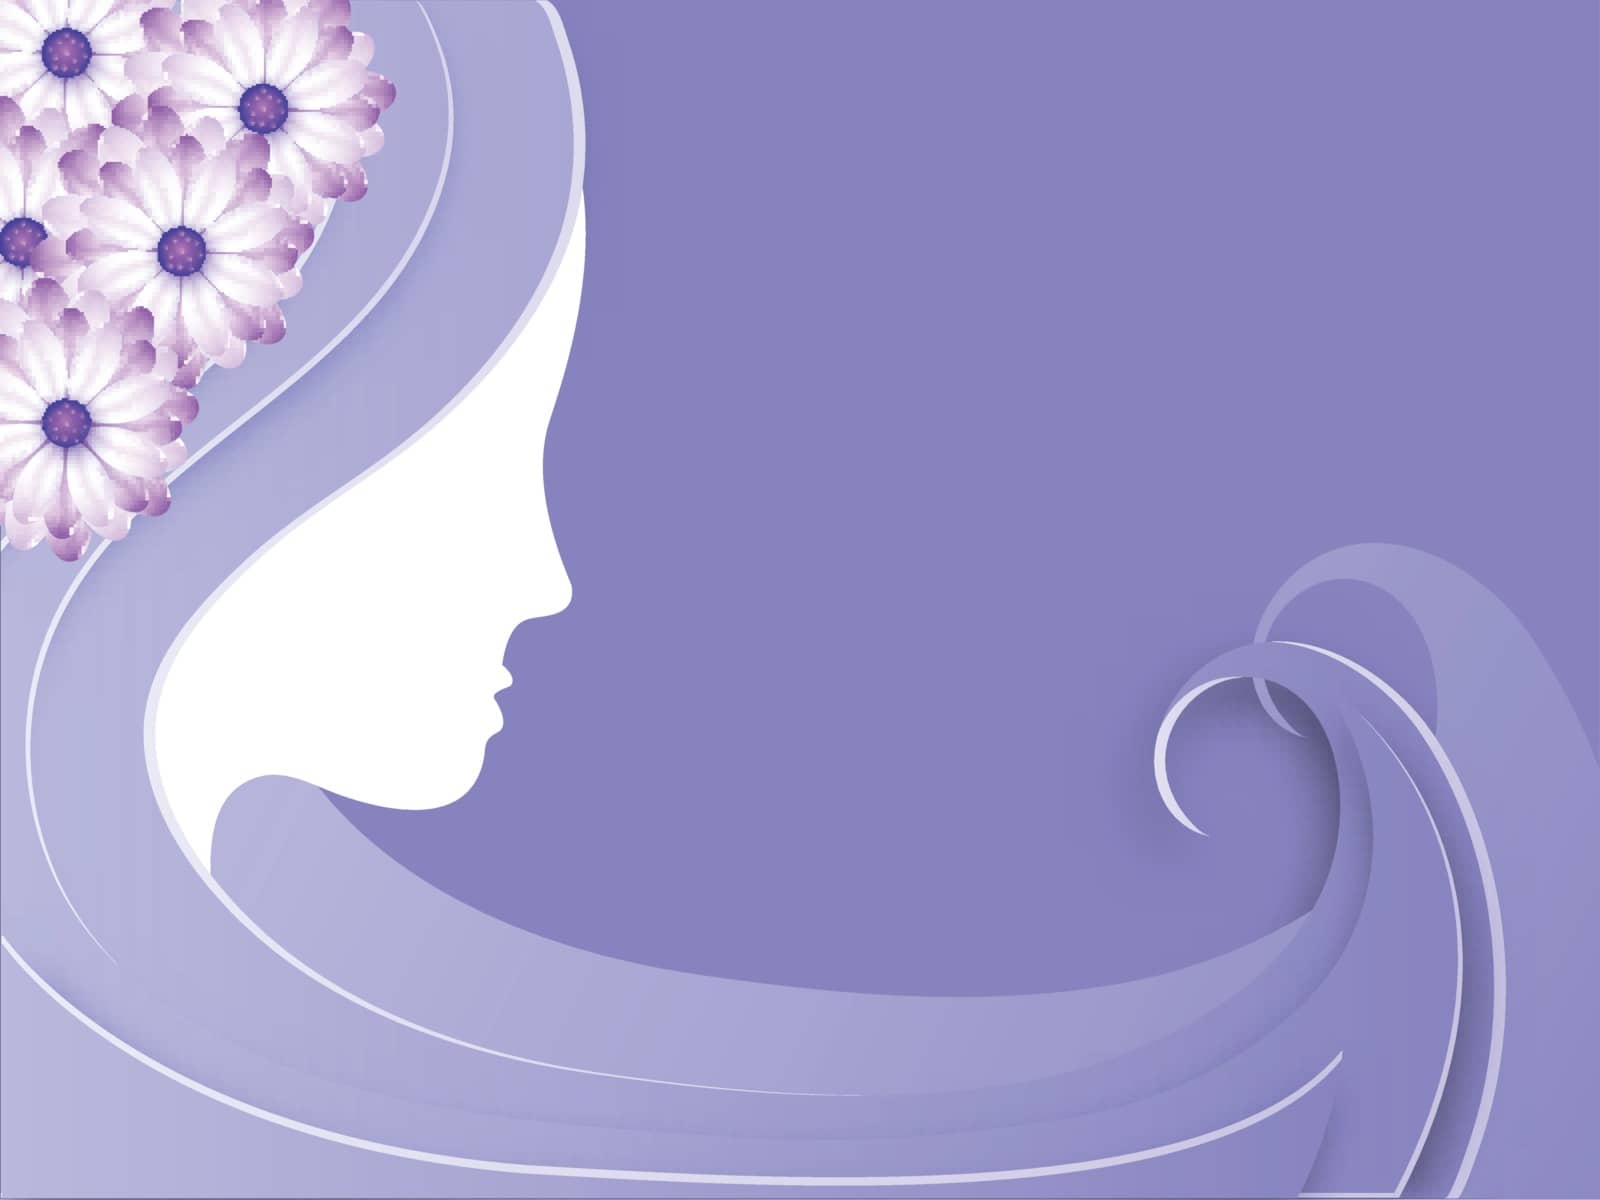 Paper cut style woman face on purple background for women's day by aispl